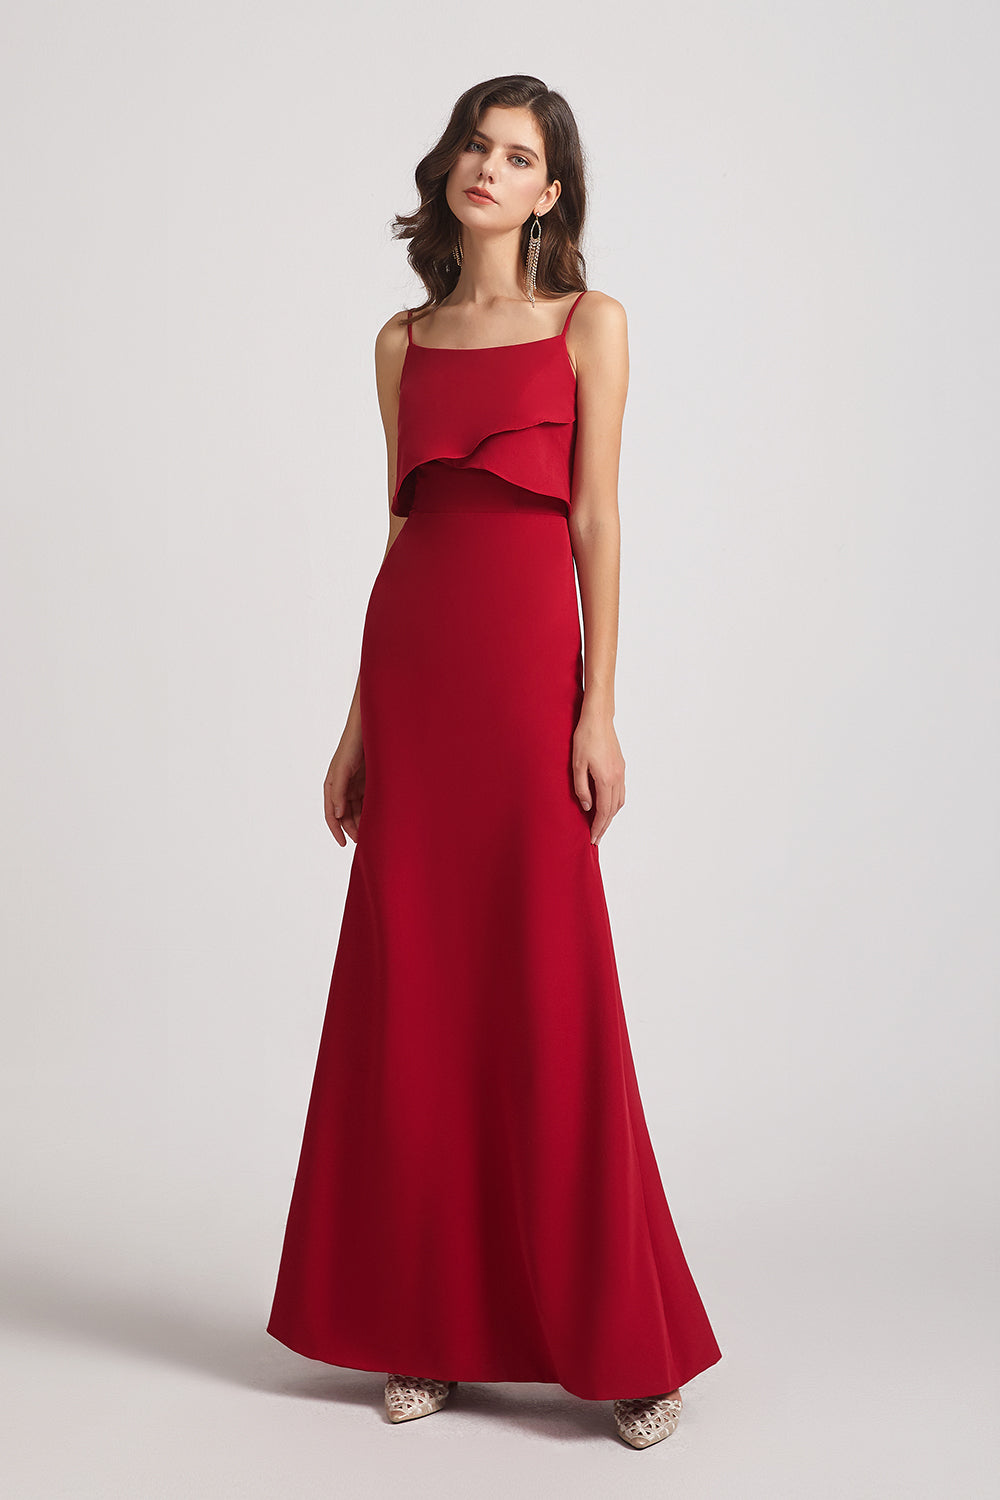 sleeveless red maxi gowns